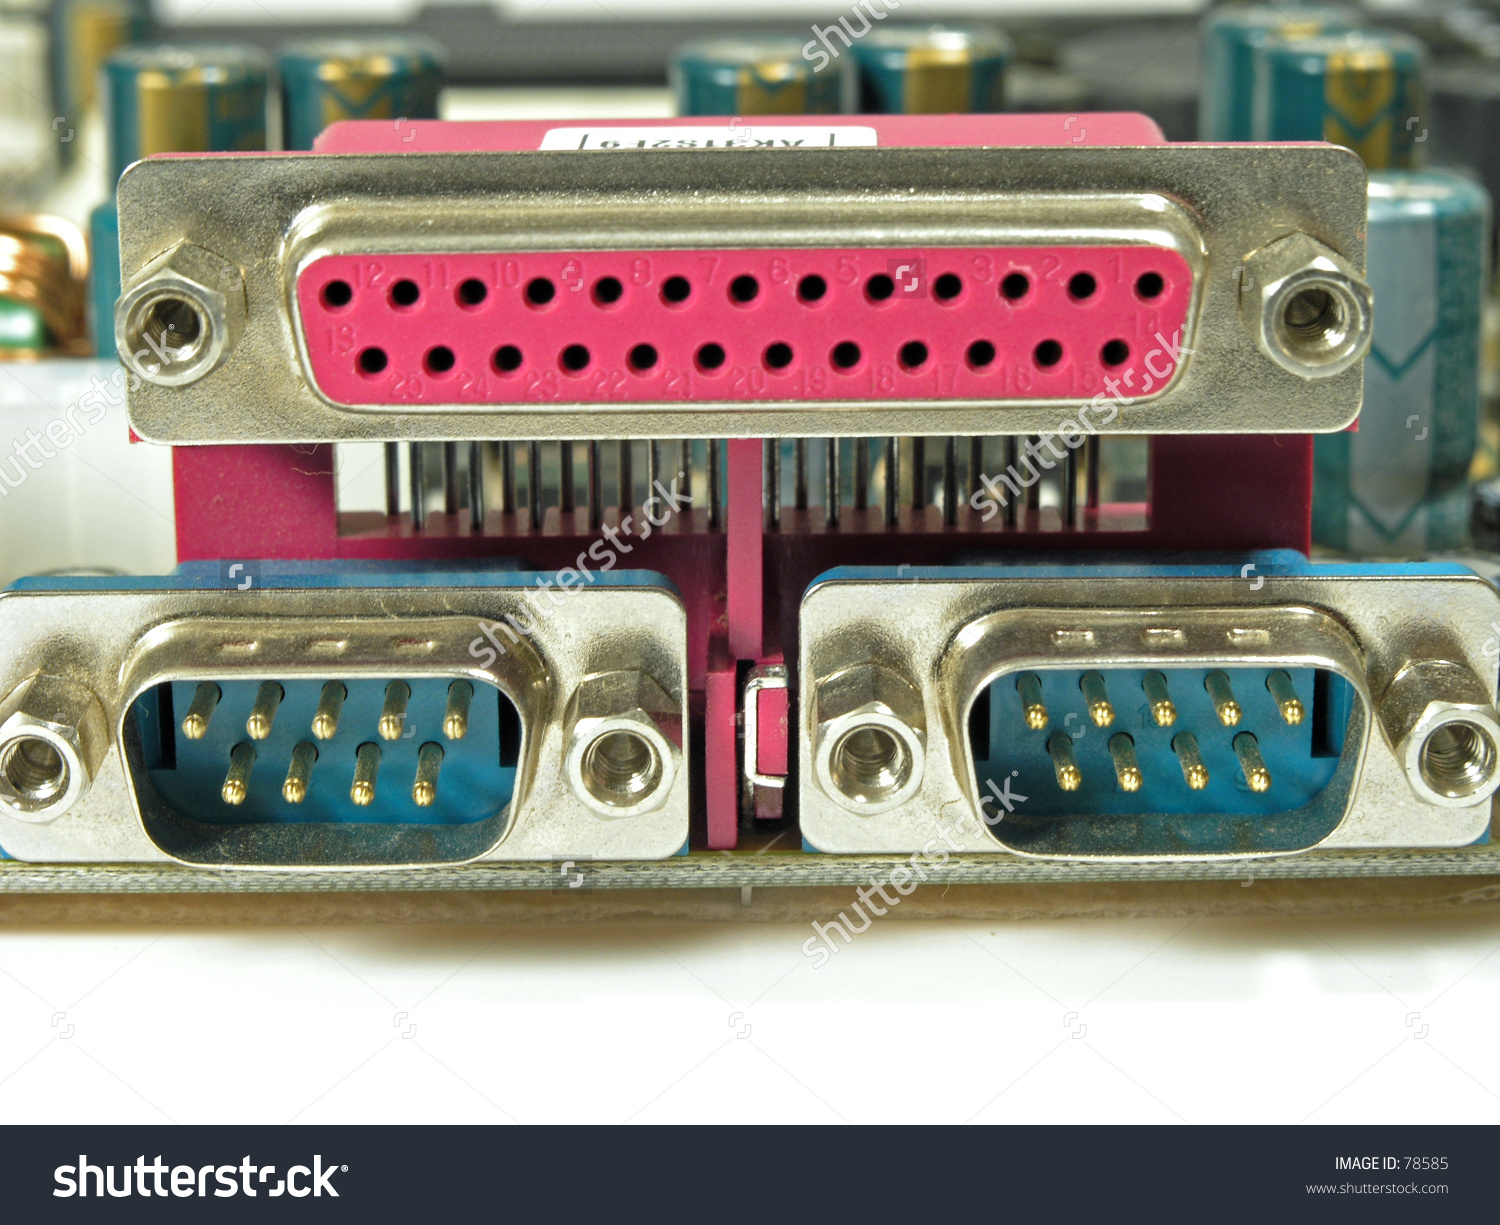 Pc Board Parallel Port Rs232 Connector Stock Photo 78585.